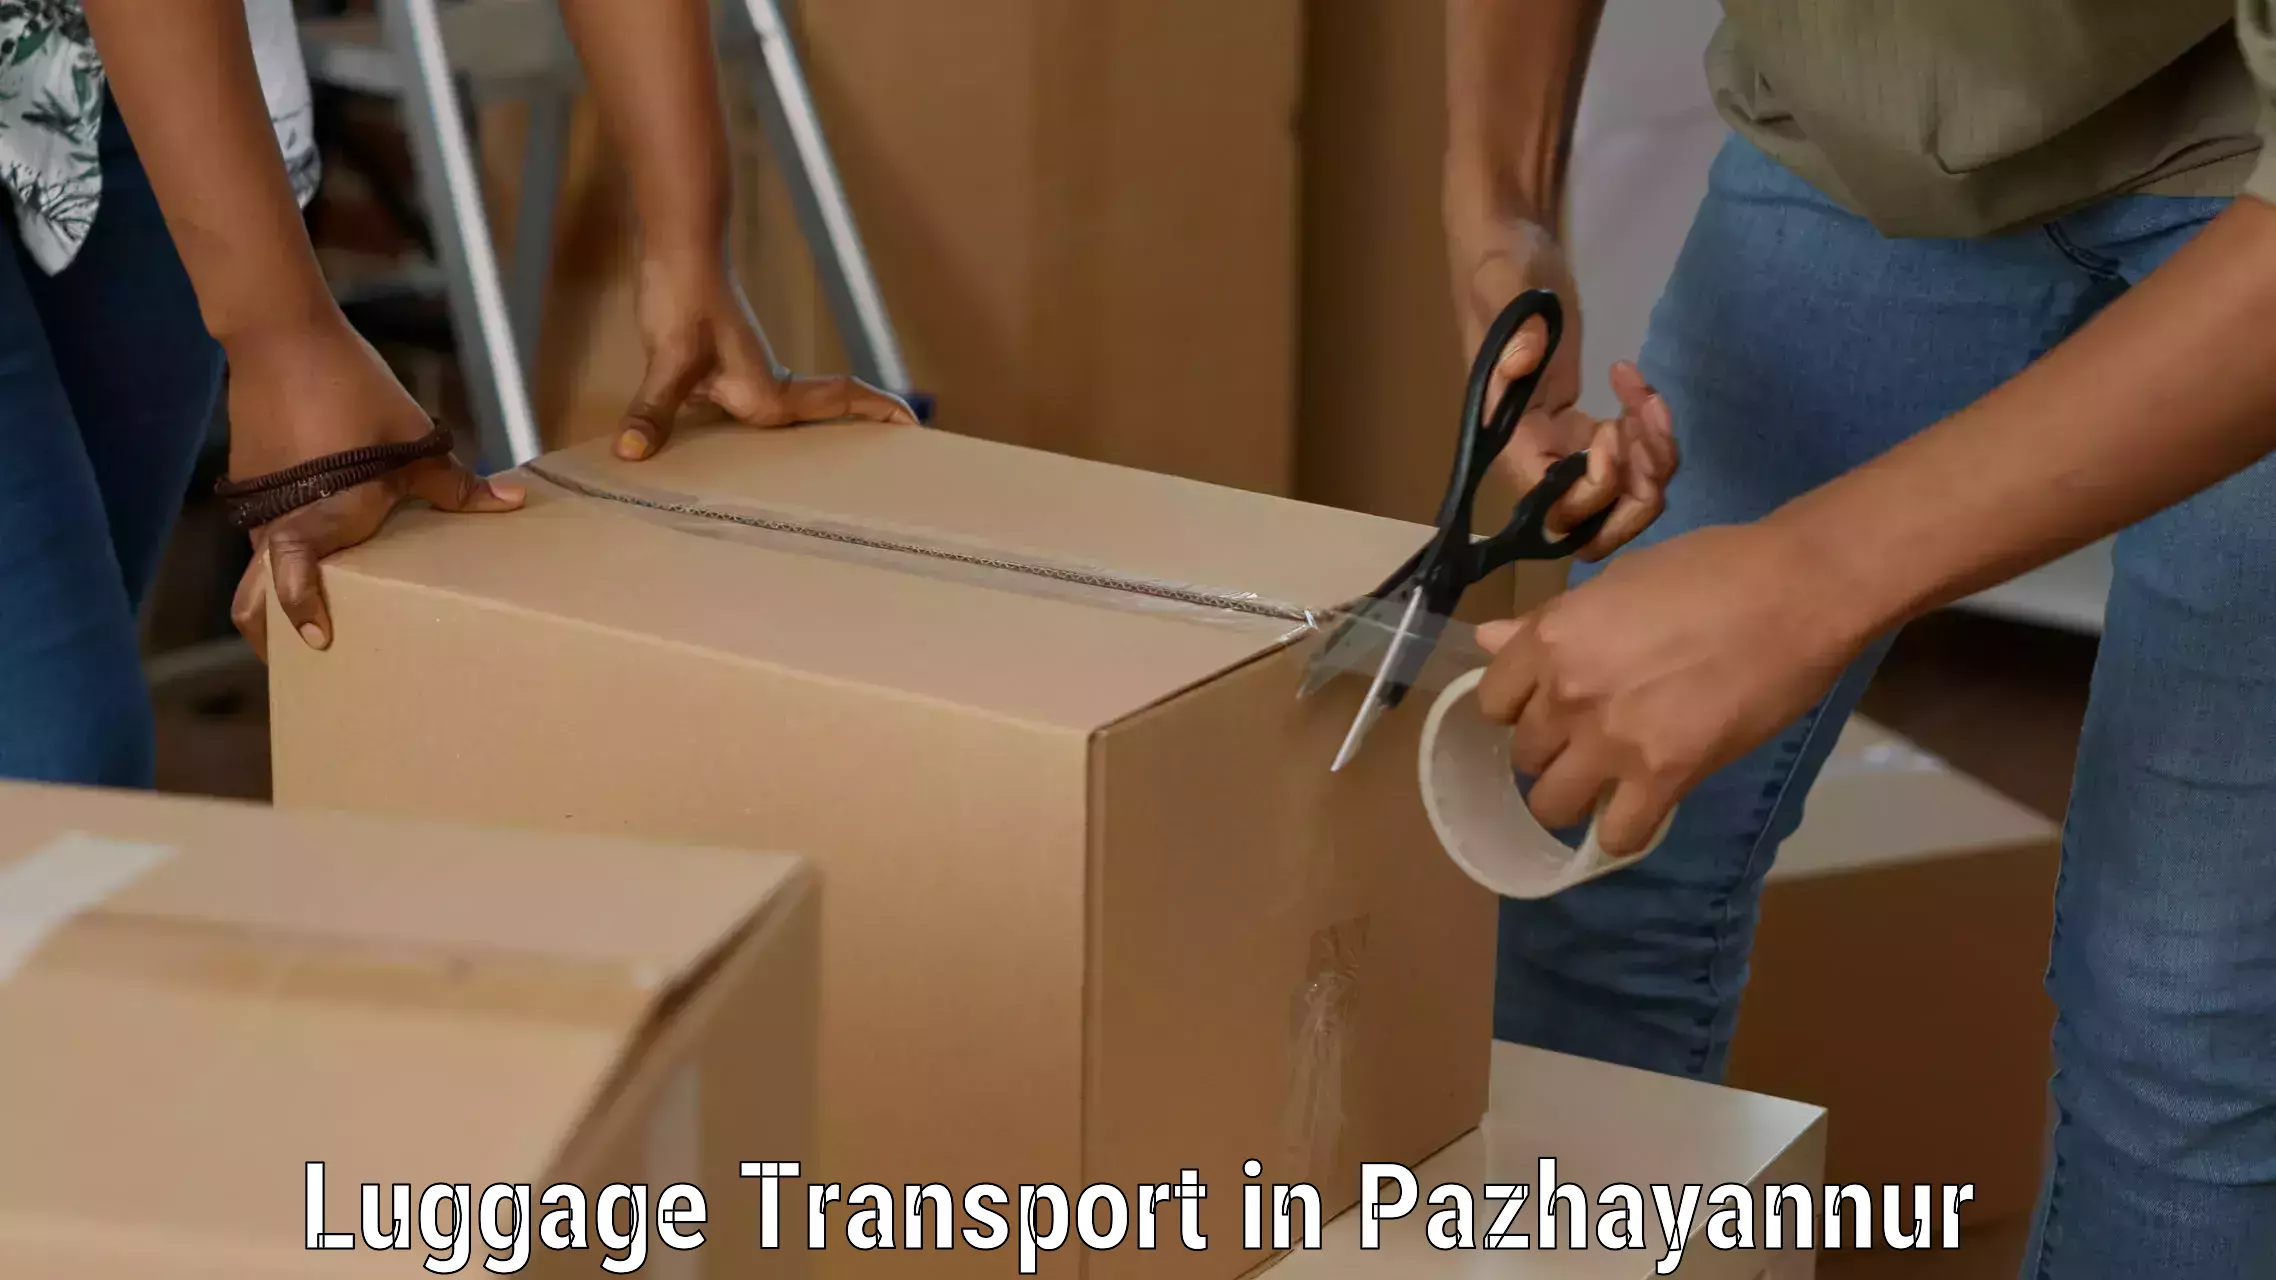 Tailored baggage transport in Pazhayannur